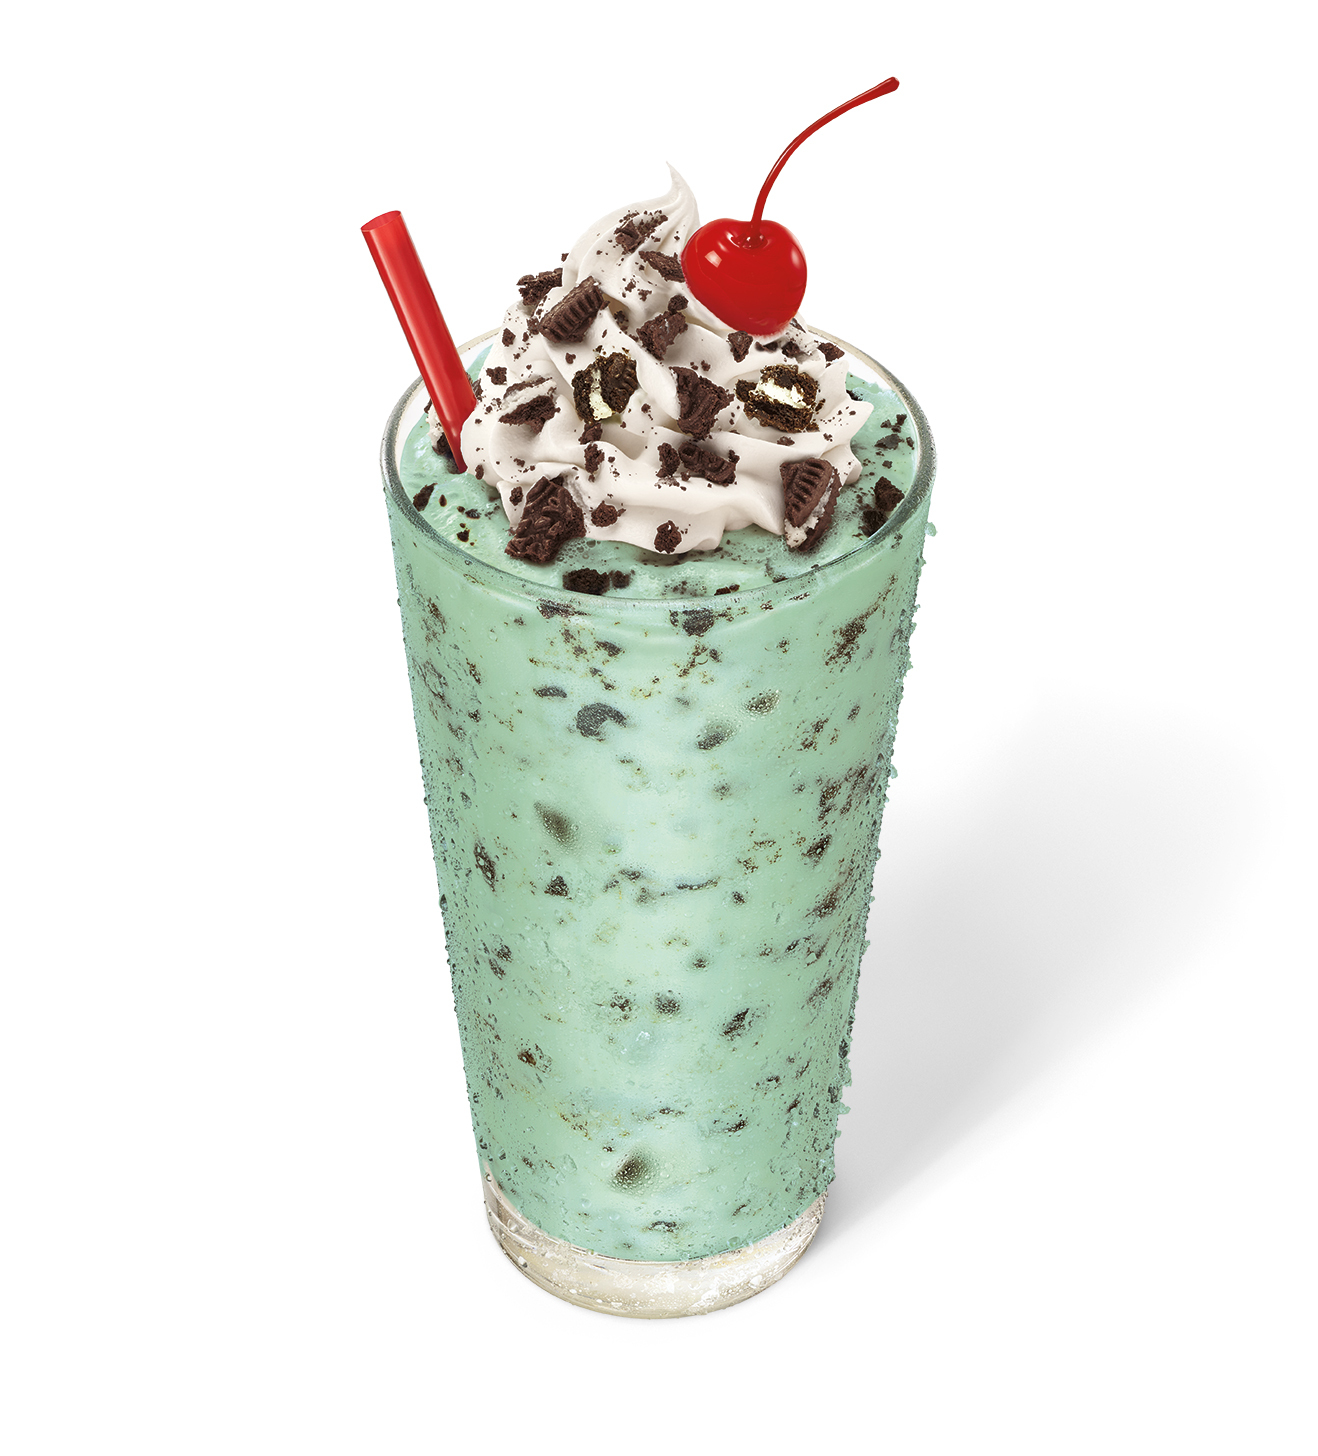 SONIC Rings in the Festive Season with New Holiday Mint Flavored Shakes